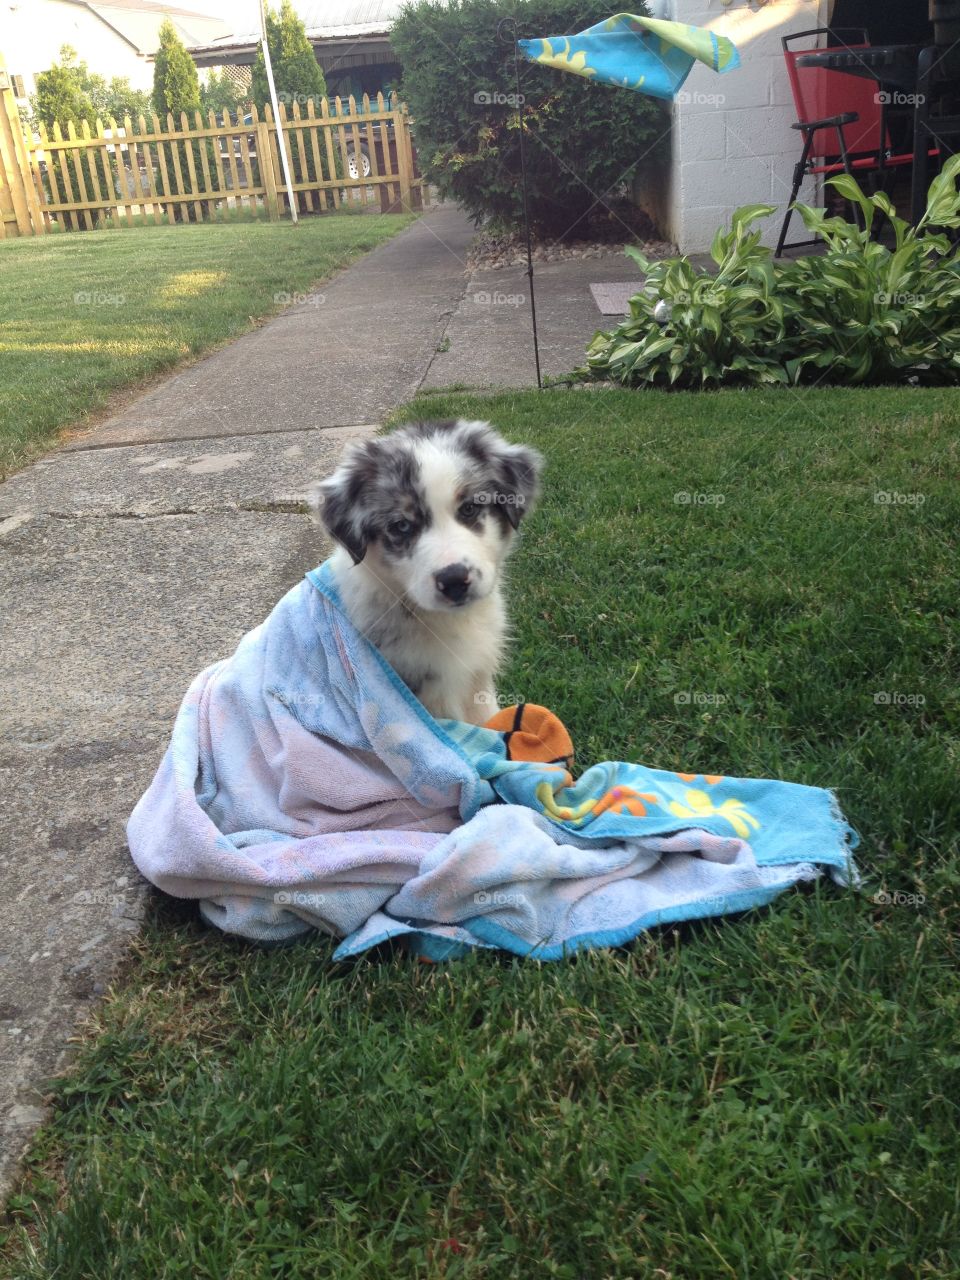 towel time after pool time